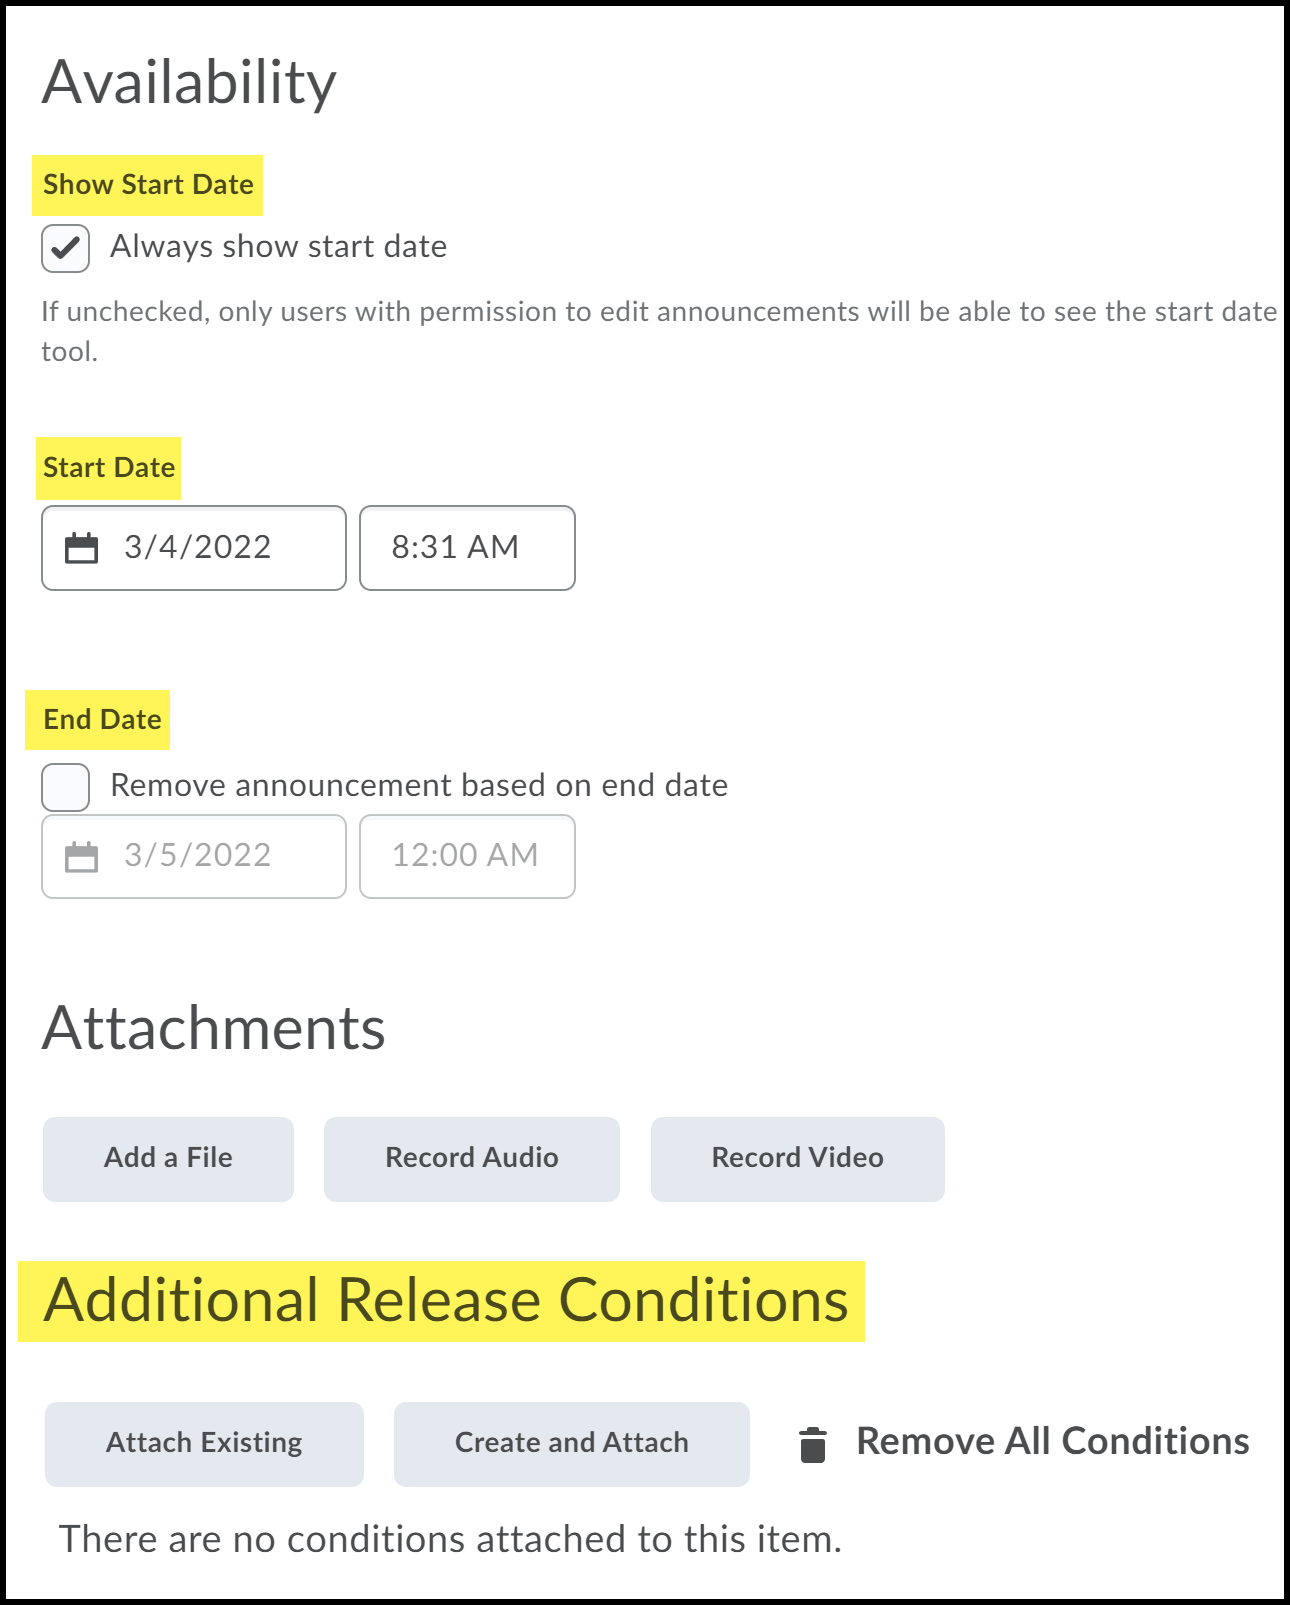 Availability dates highlighted. Release conditions highlighted.